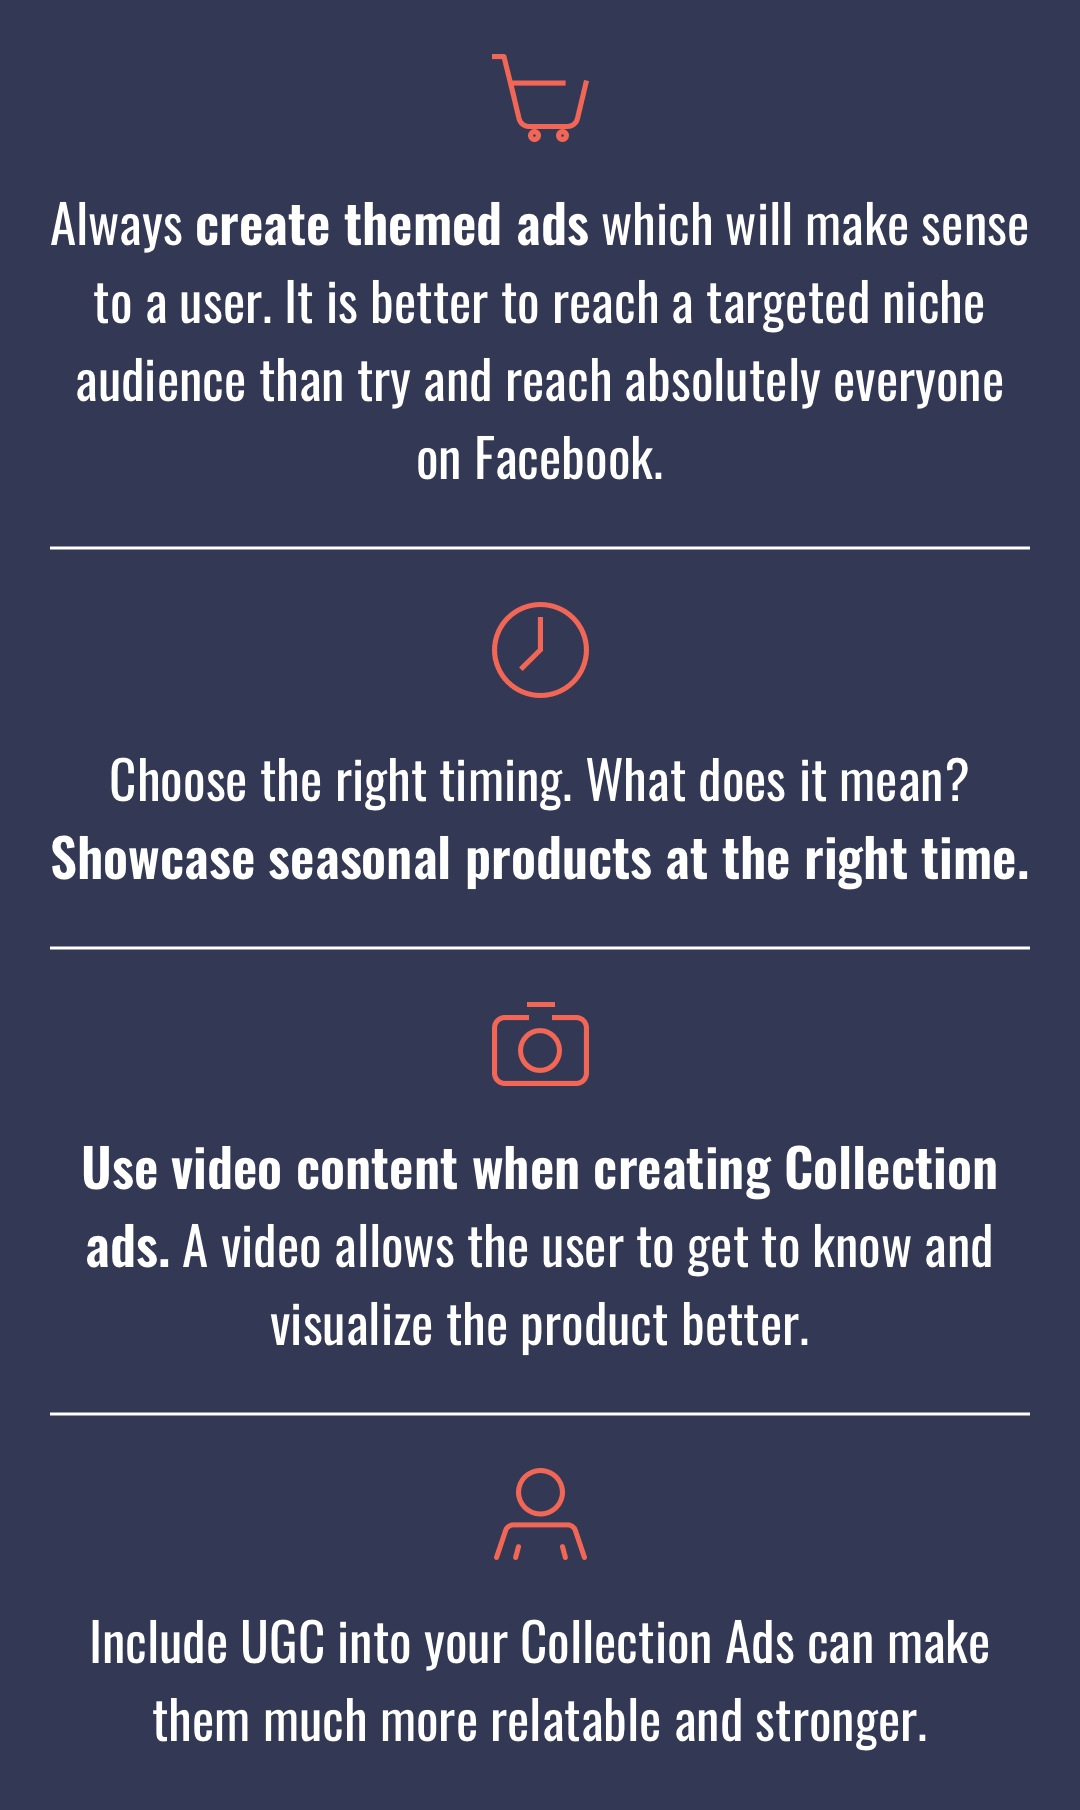 Facebook_collection_infographic-min